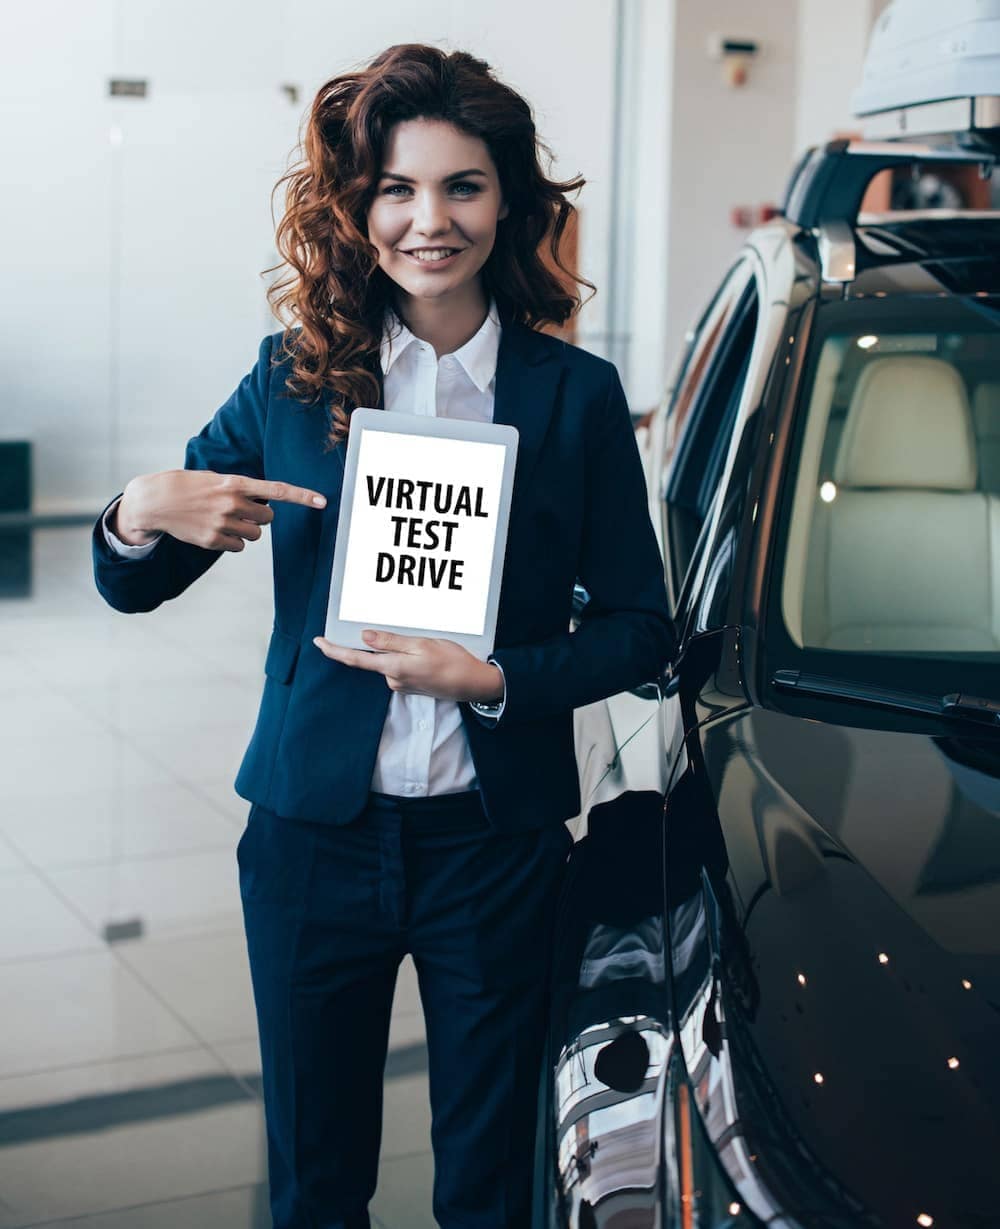 A woman holding a virtual test drive sign